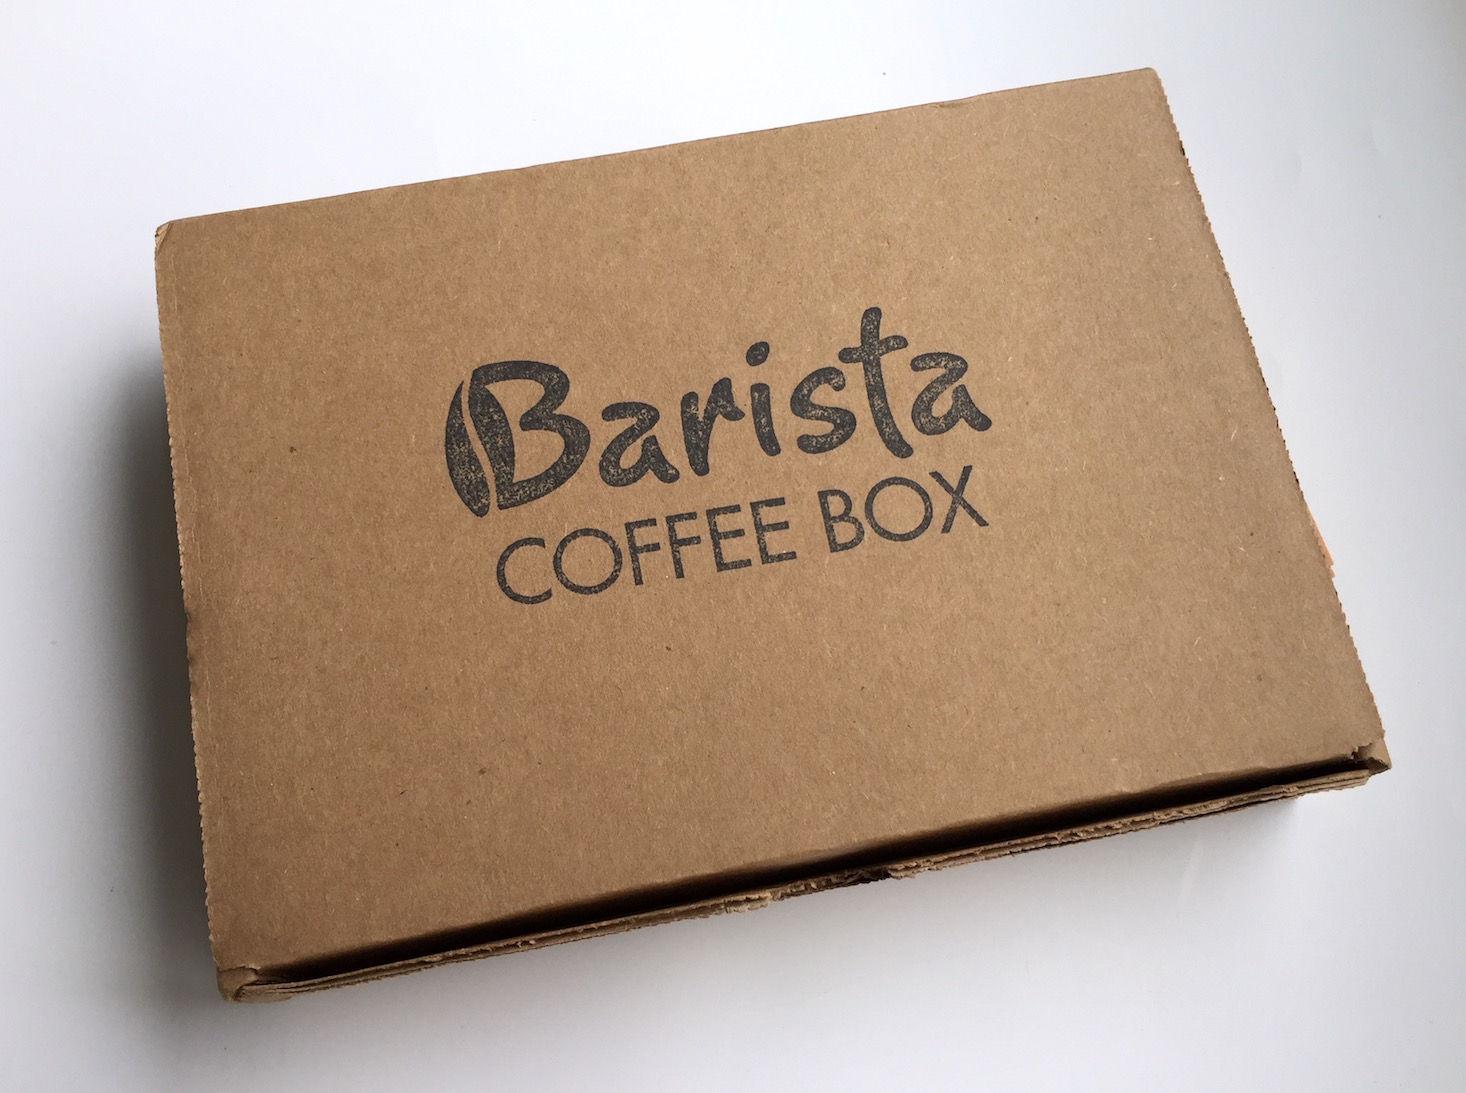 Barista Coffee Box Subscription Review – September 2016